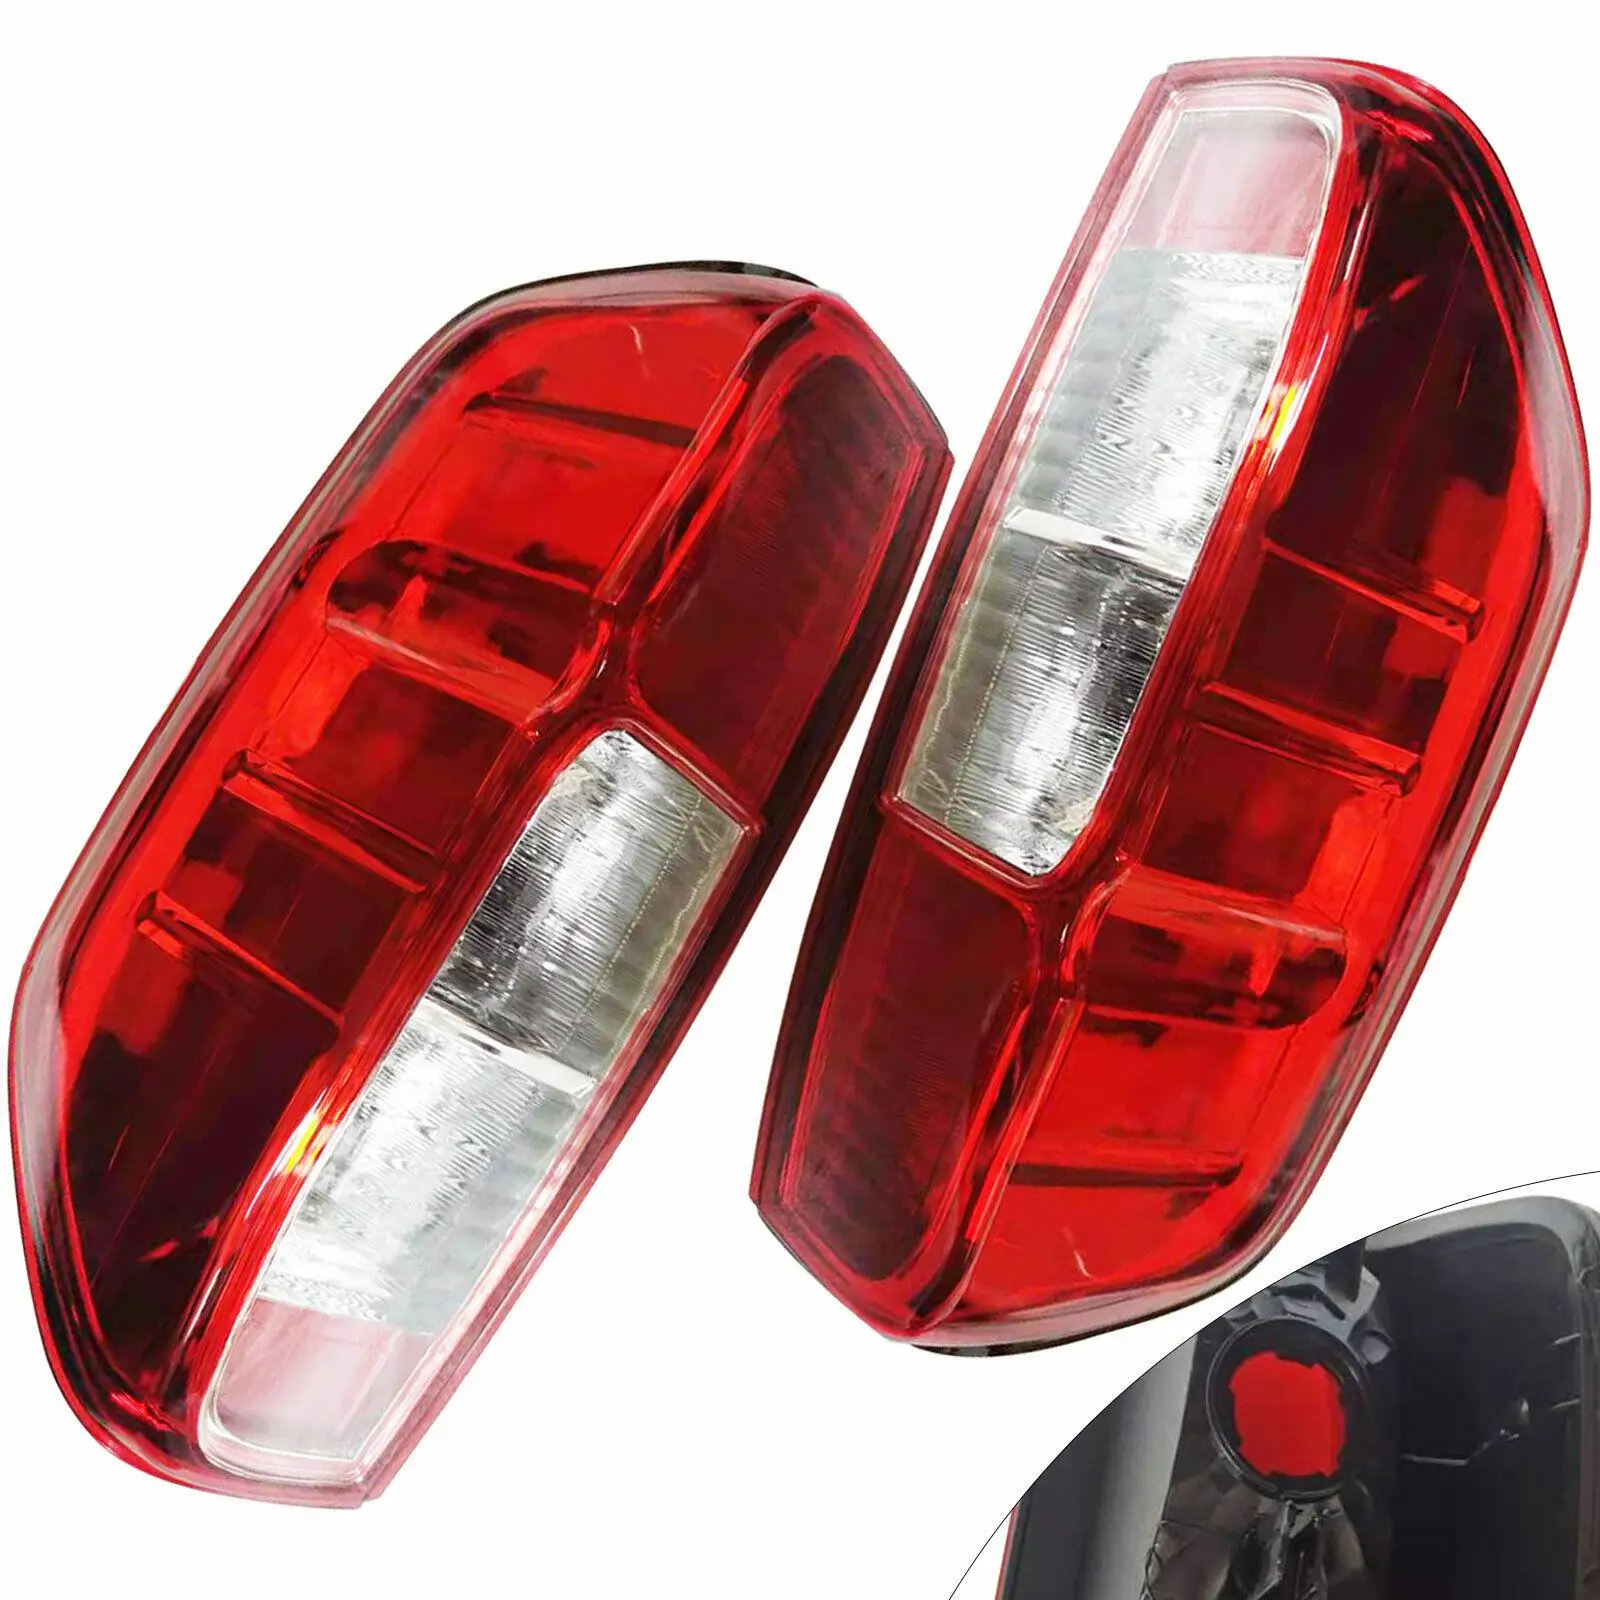 Pair Left & Right Rear Brake Lamps Tail Lights Taillamps for Nissan Frontier 2005-2015 Red Lens red lens motorcycle brake rear license plate bracket tail light universal 12v